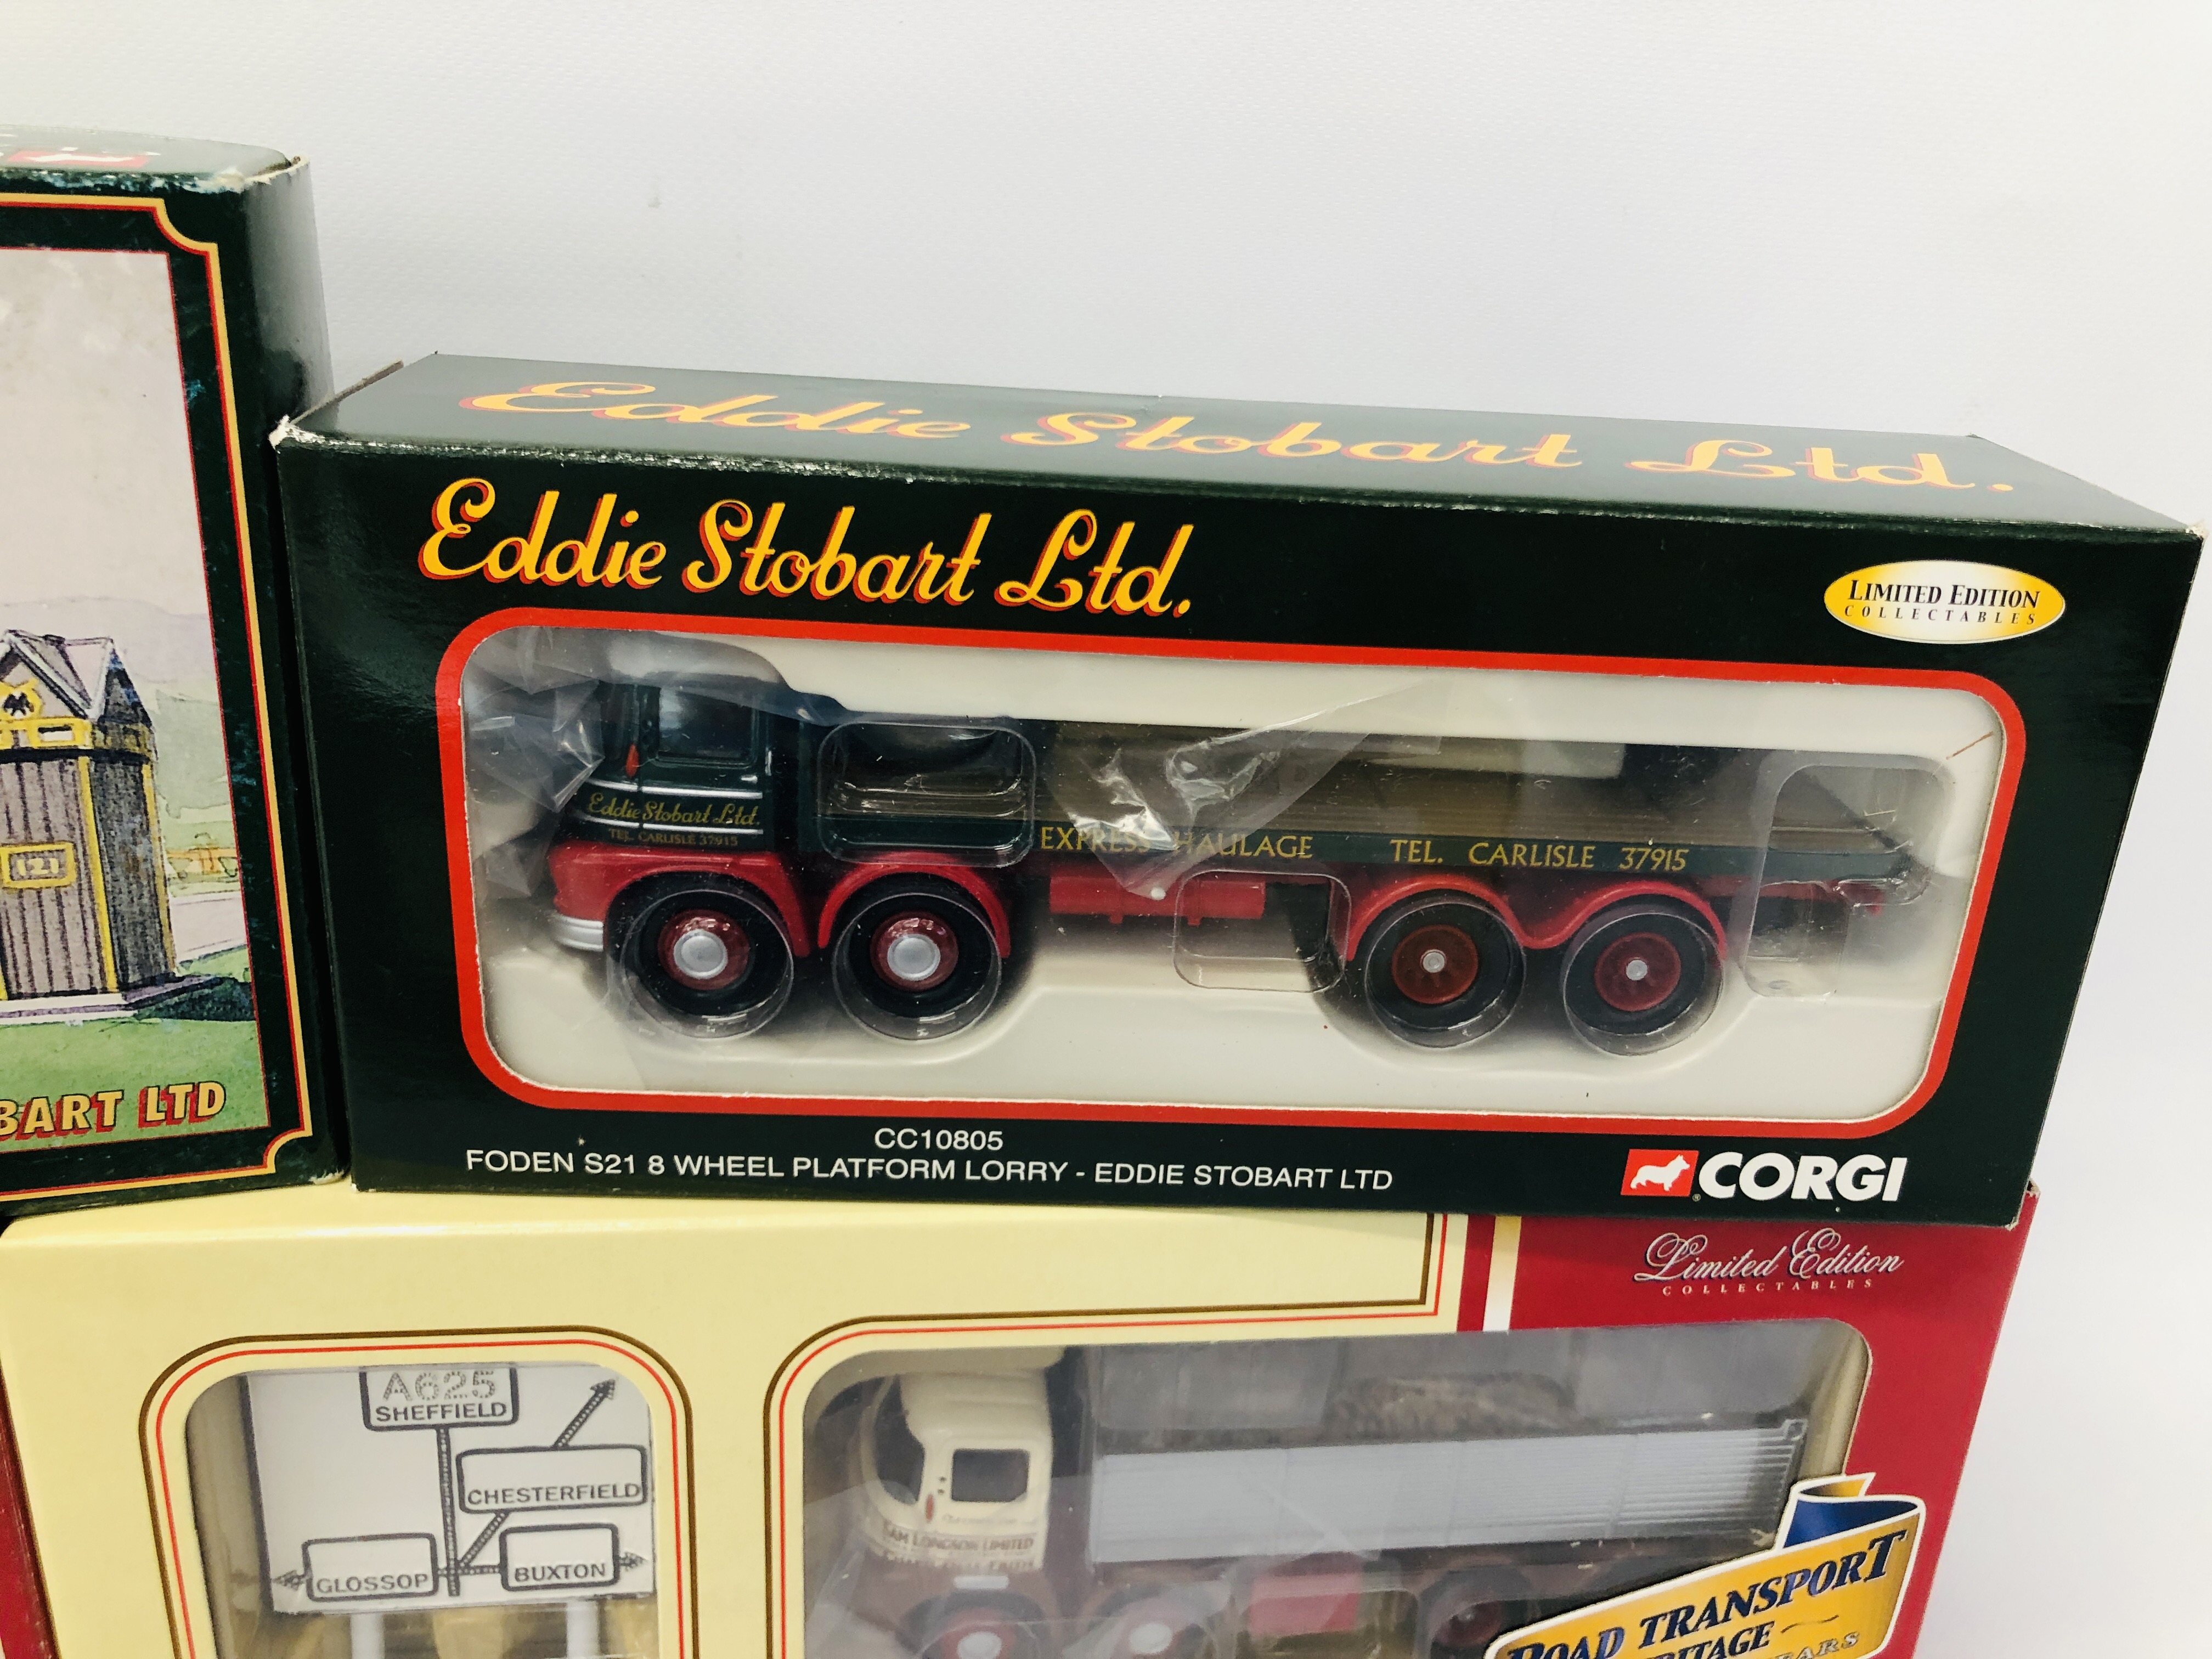 6 X BOXED CORGI DIE CAST COMMERCIALS TO INCLUDE 2 X FODEN S21 TIPPER, FODEN 8 WHEEL RIDGED, - Image 2 of 15